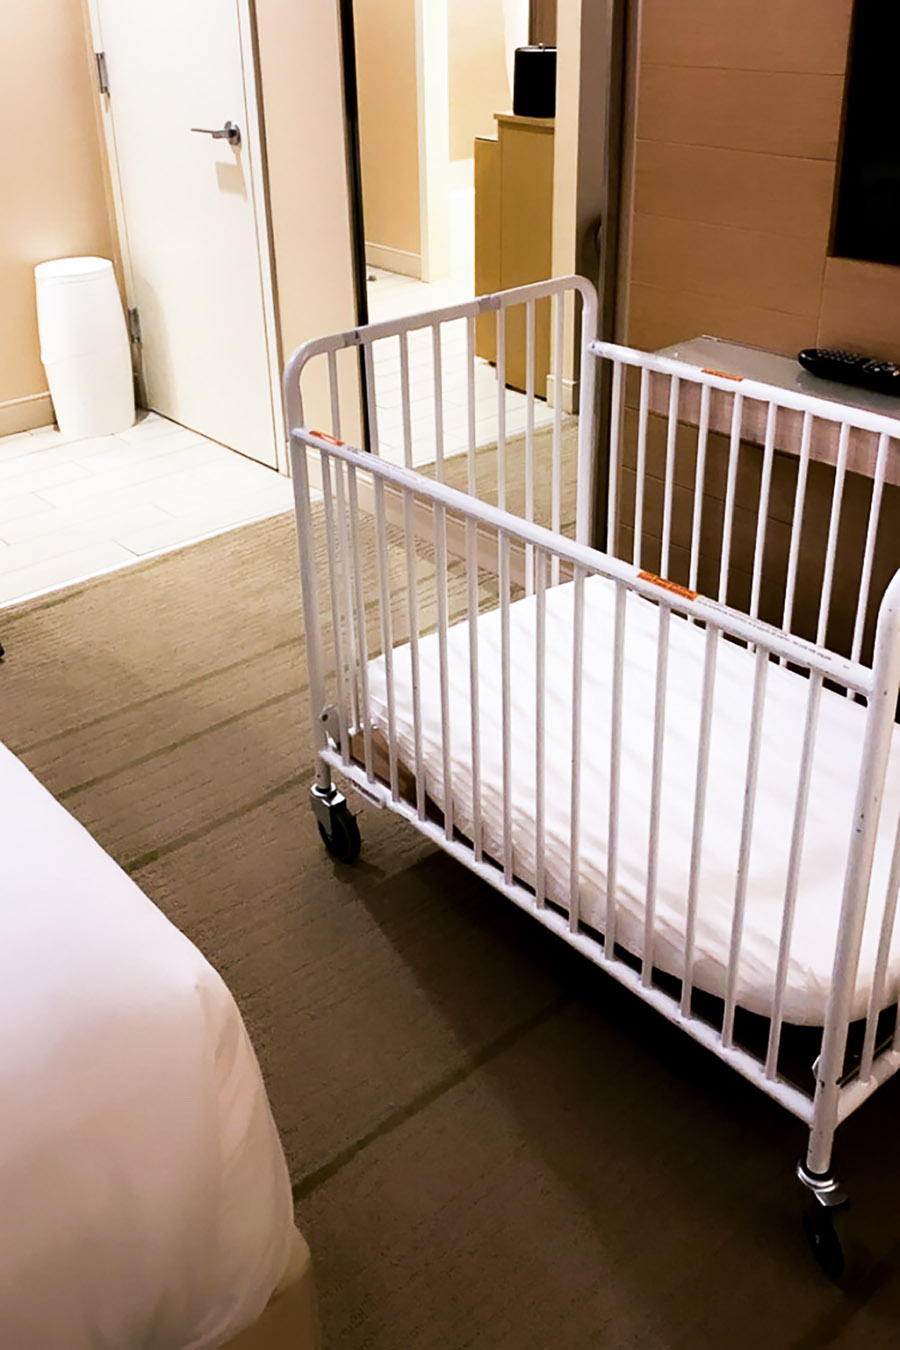 5 Tips Baby-Proofing AirBnB, Hotel, Vacation Traveling With Kids